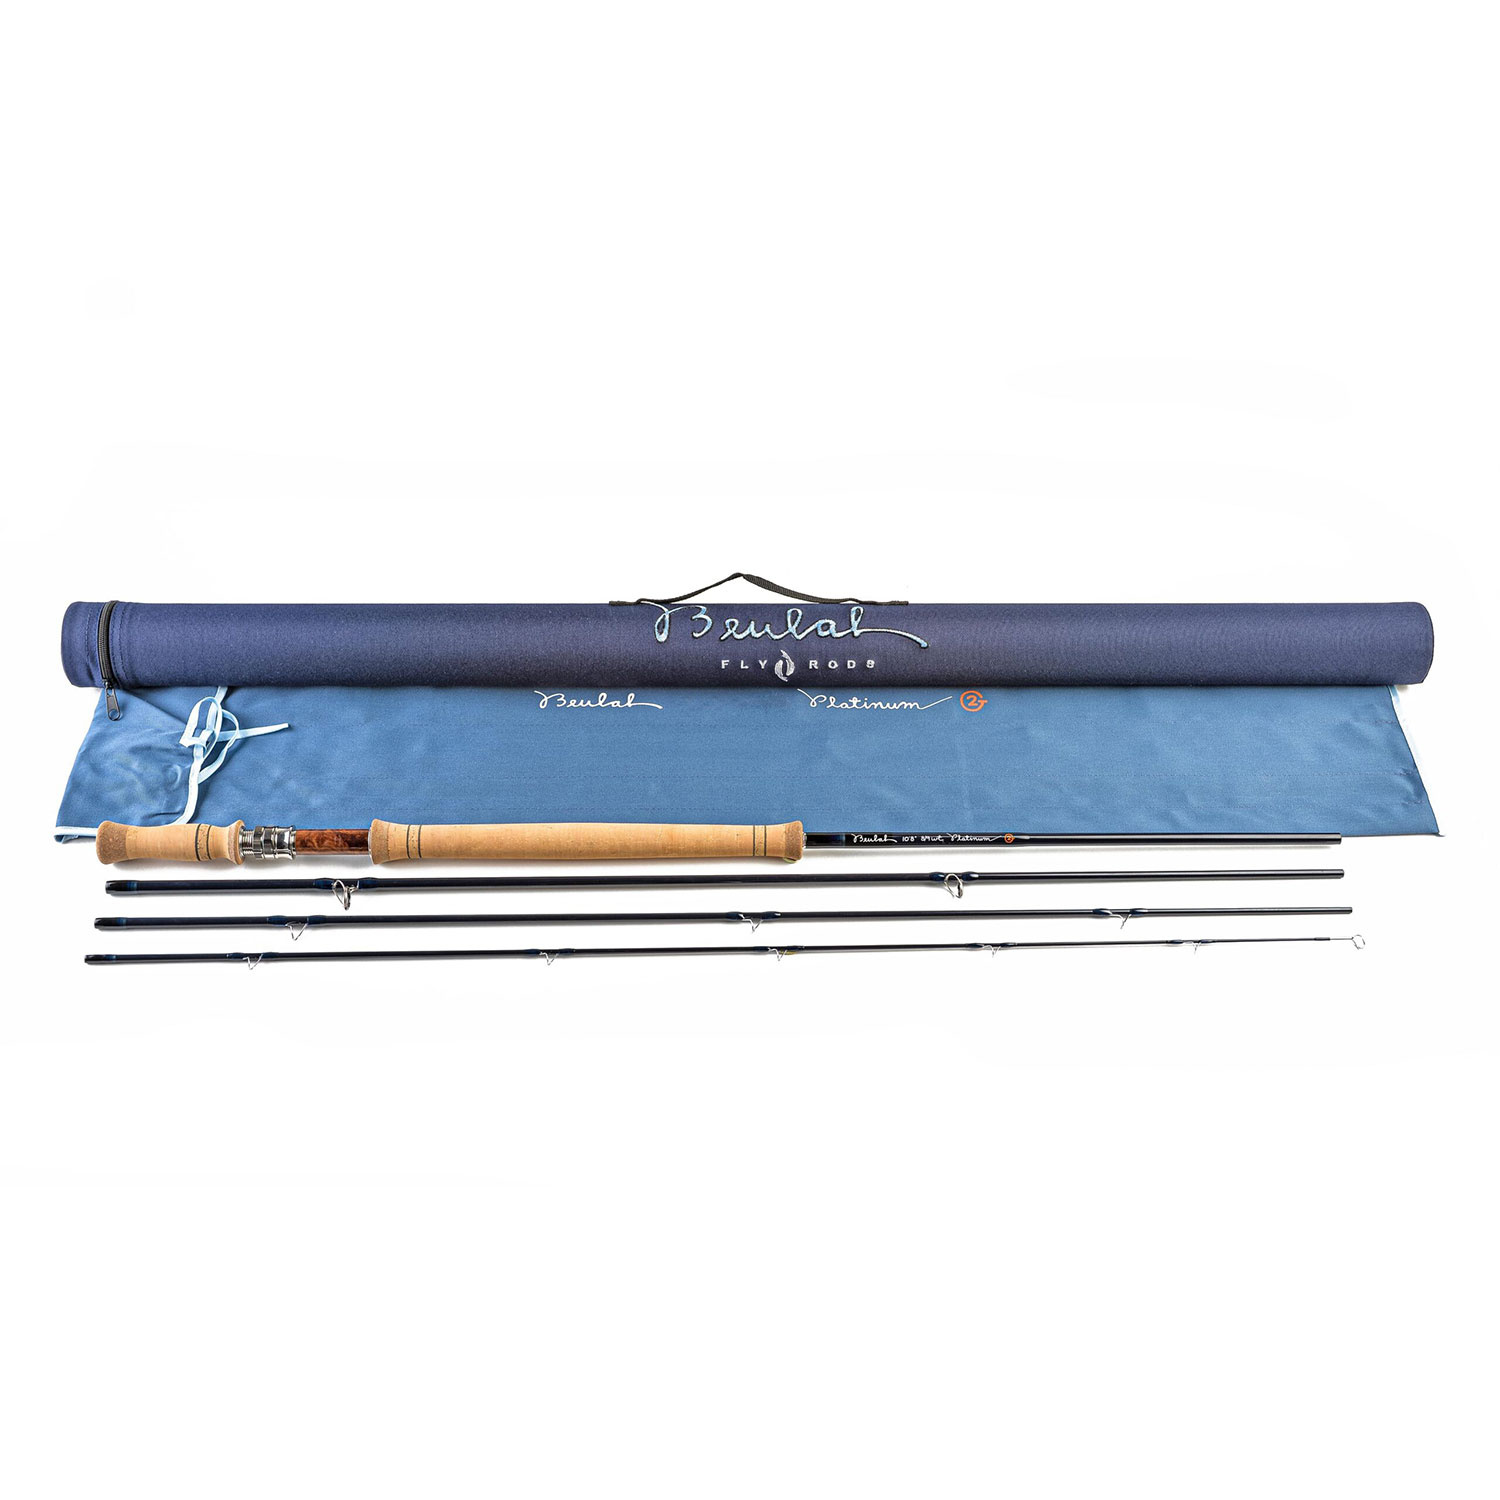 Beulah G2 Platinum Spey DH Fly Rod